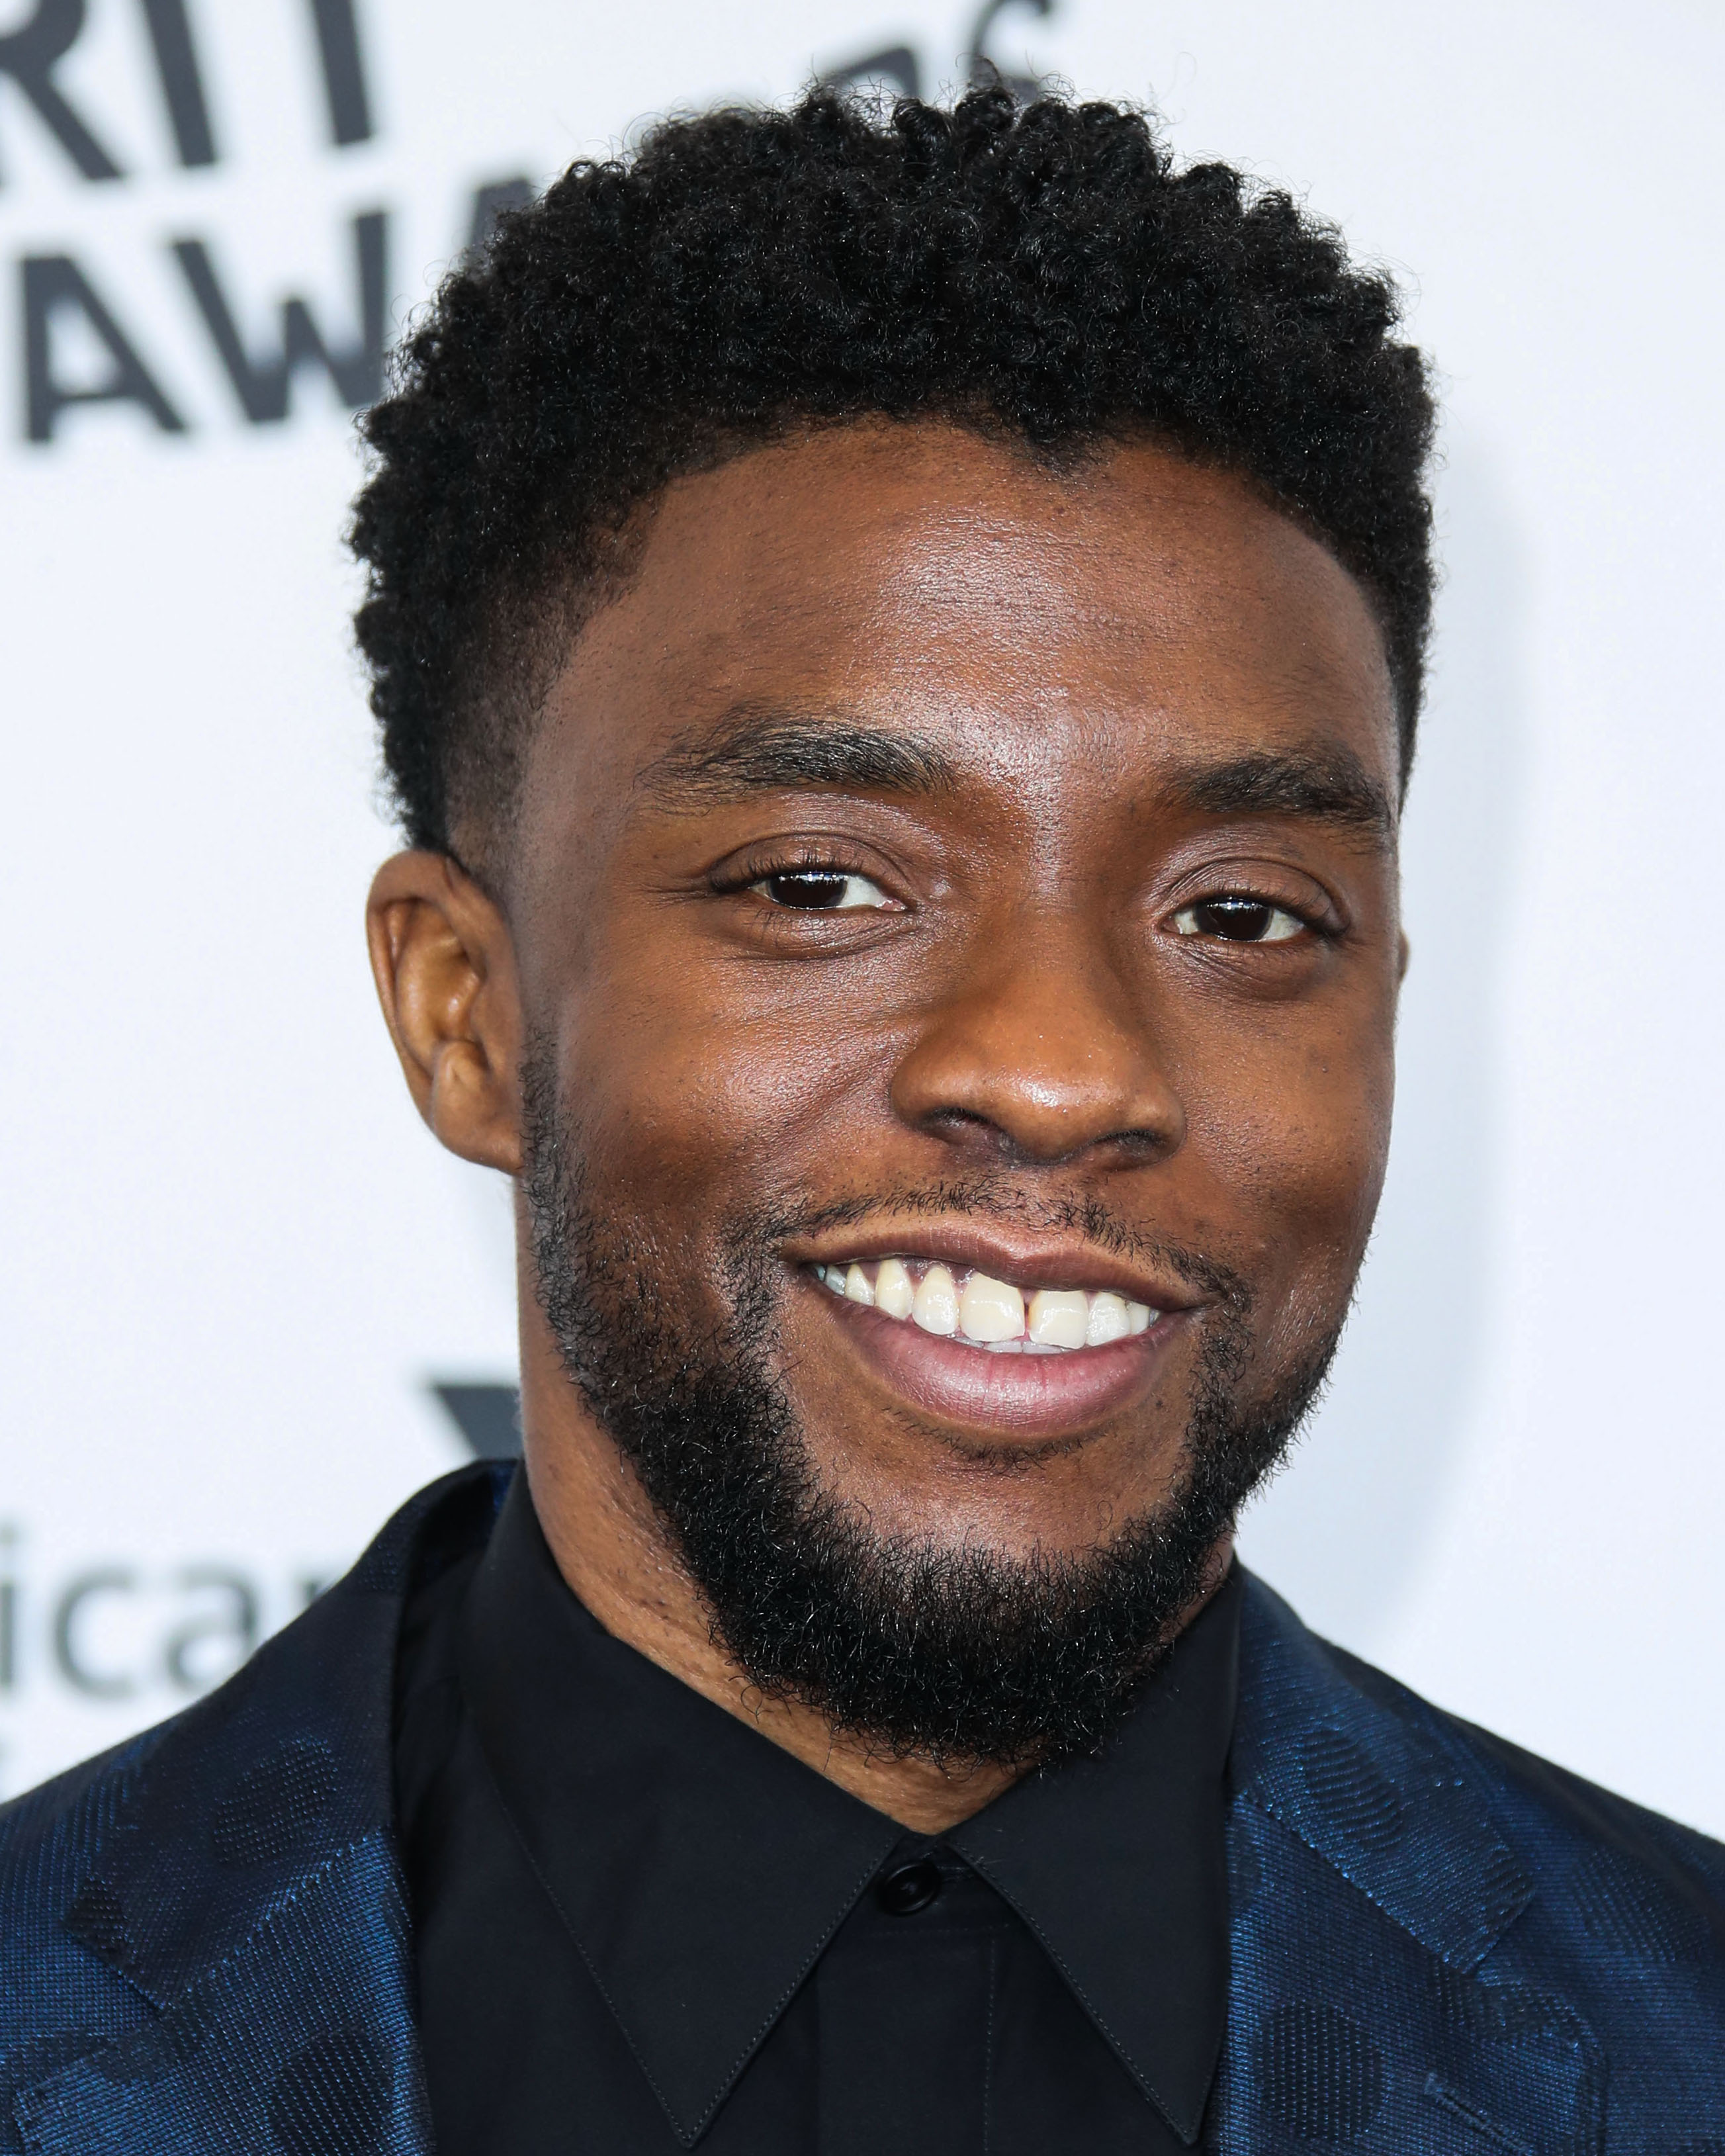 (FILE) Chadwick Boseman Dead at 43 After Battle With Colon Cancer. SANTA MONICA, LOS ANGELES, CALIFO...